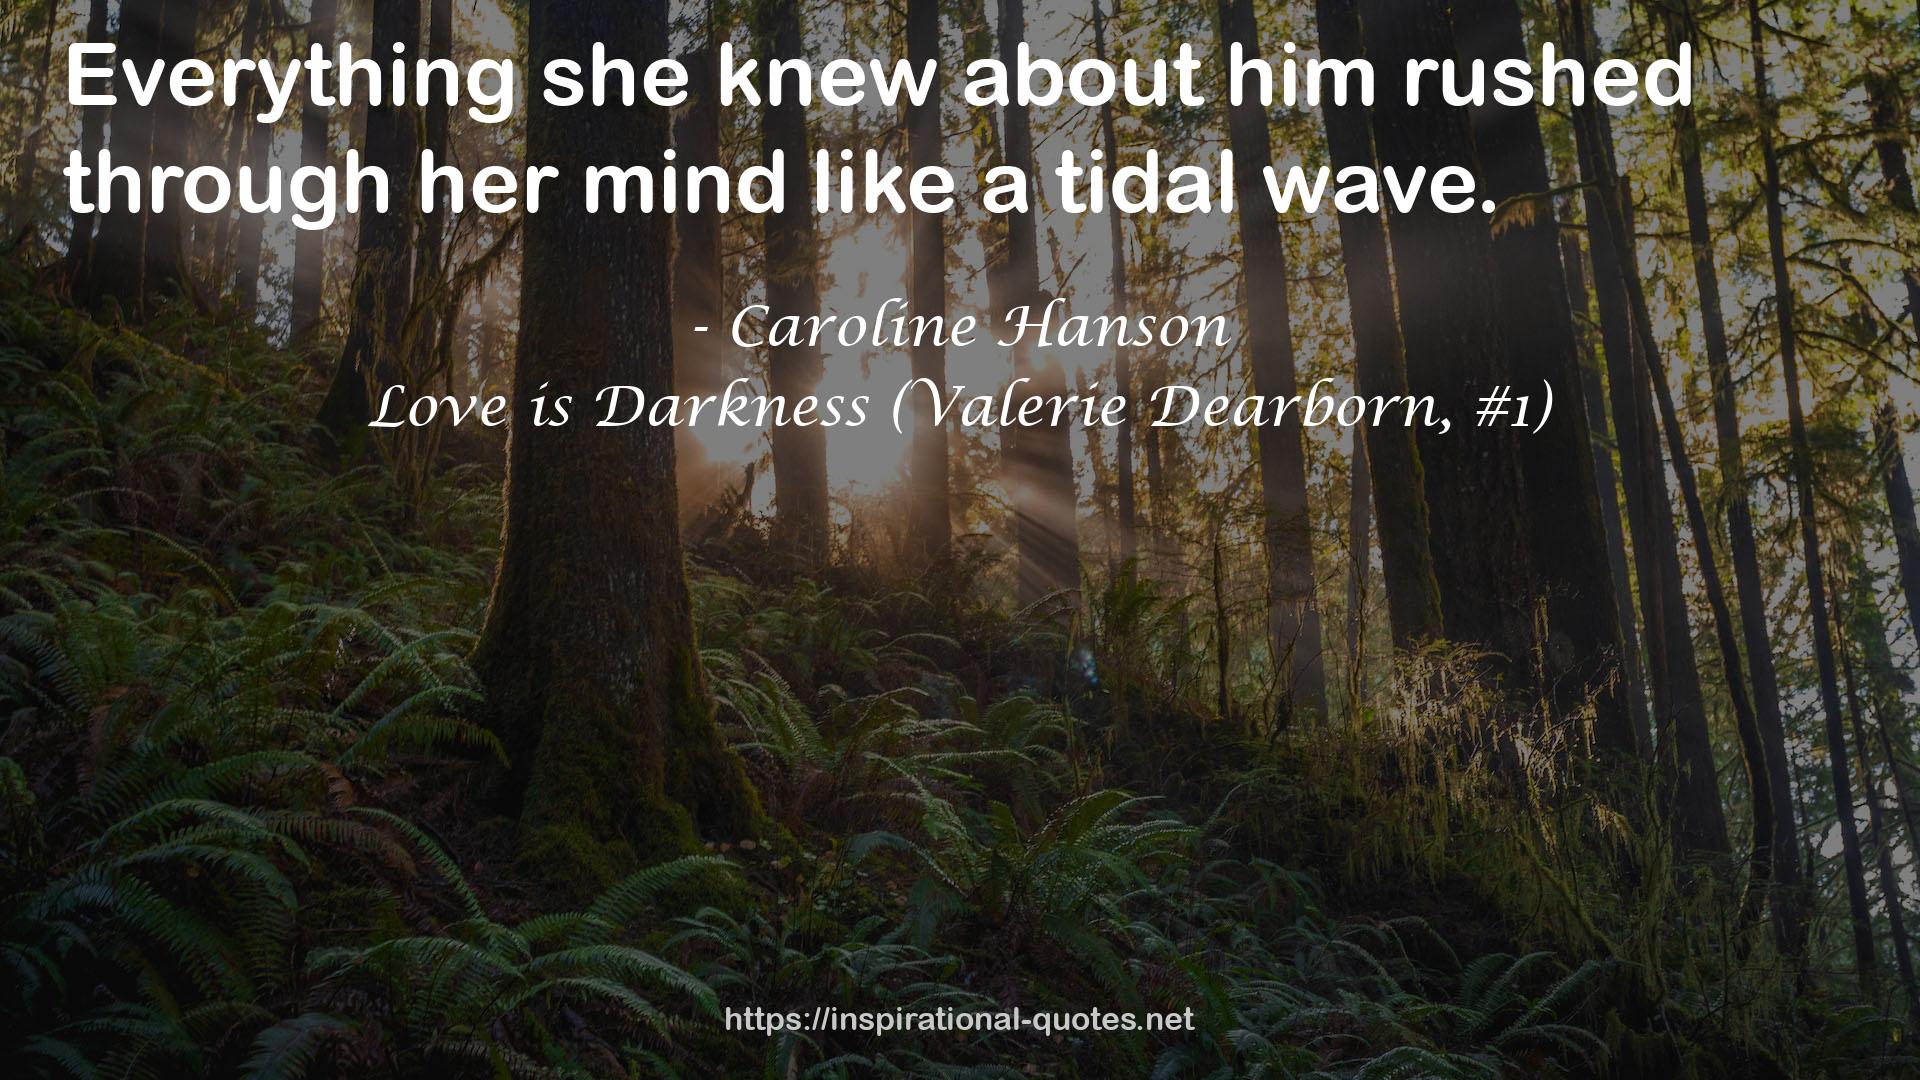 Love is Darkness (Valerie Dearborn, #1) QUOTES